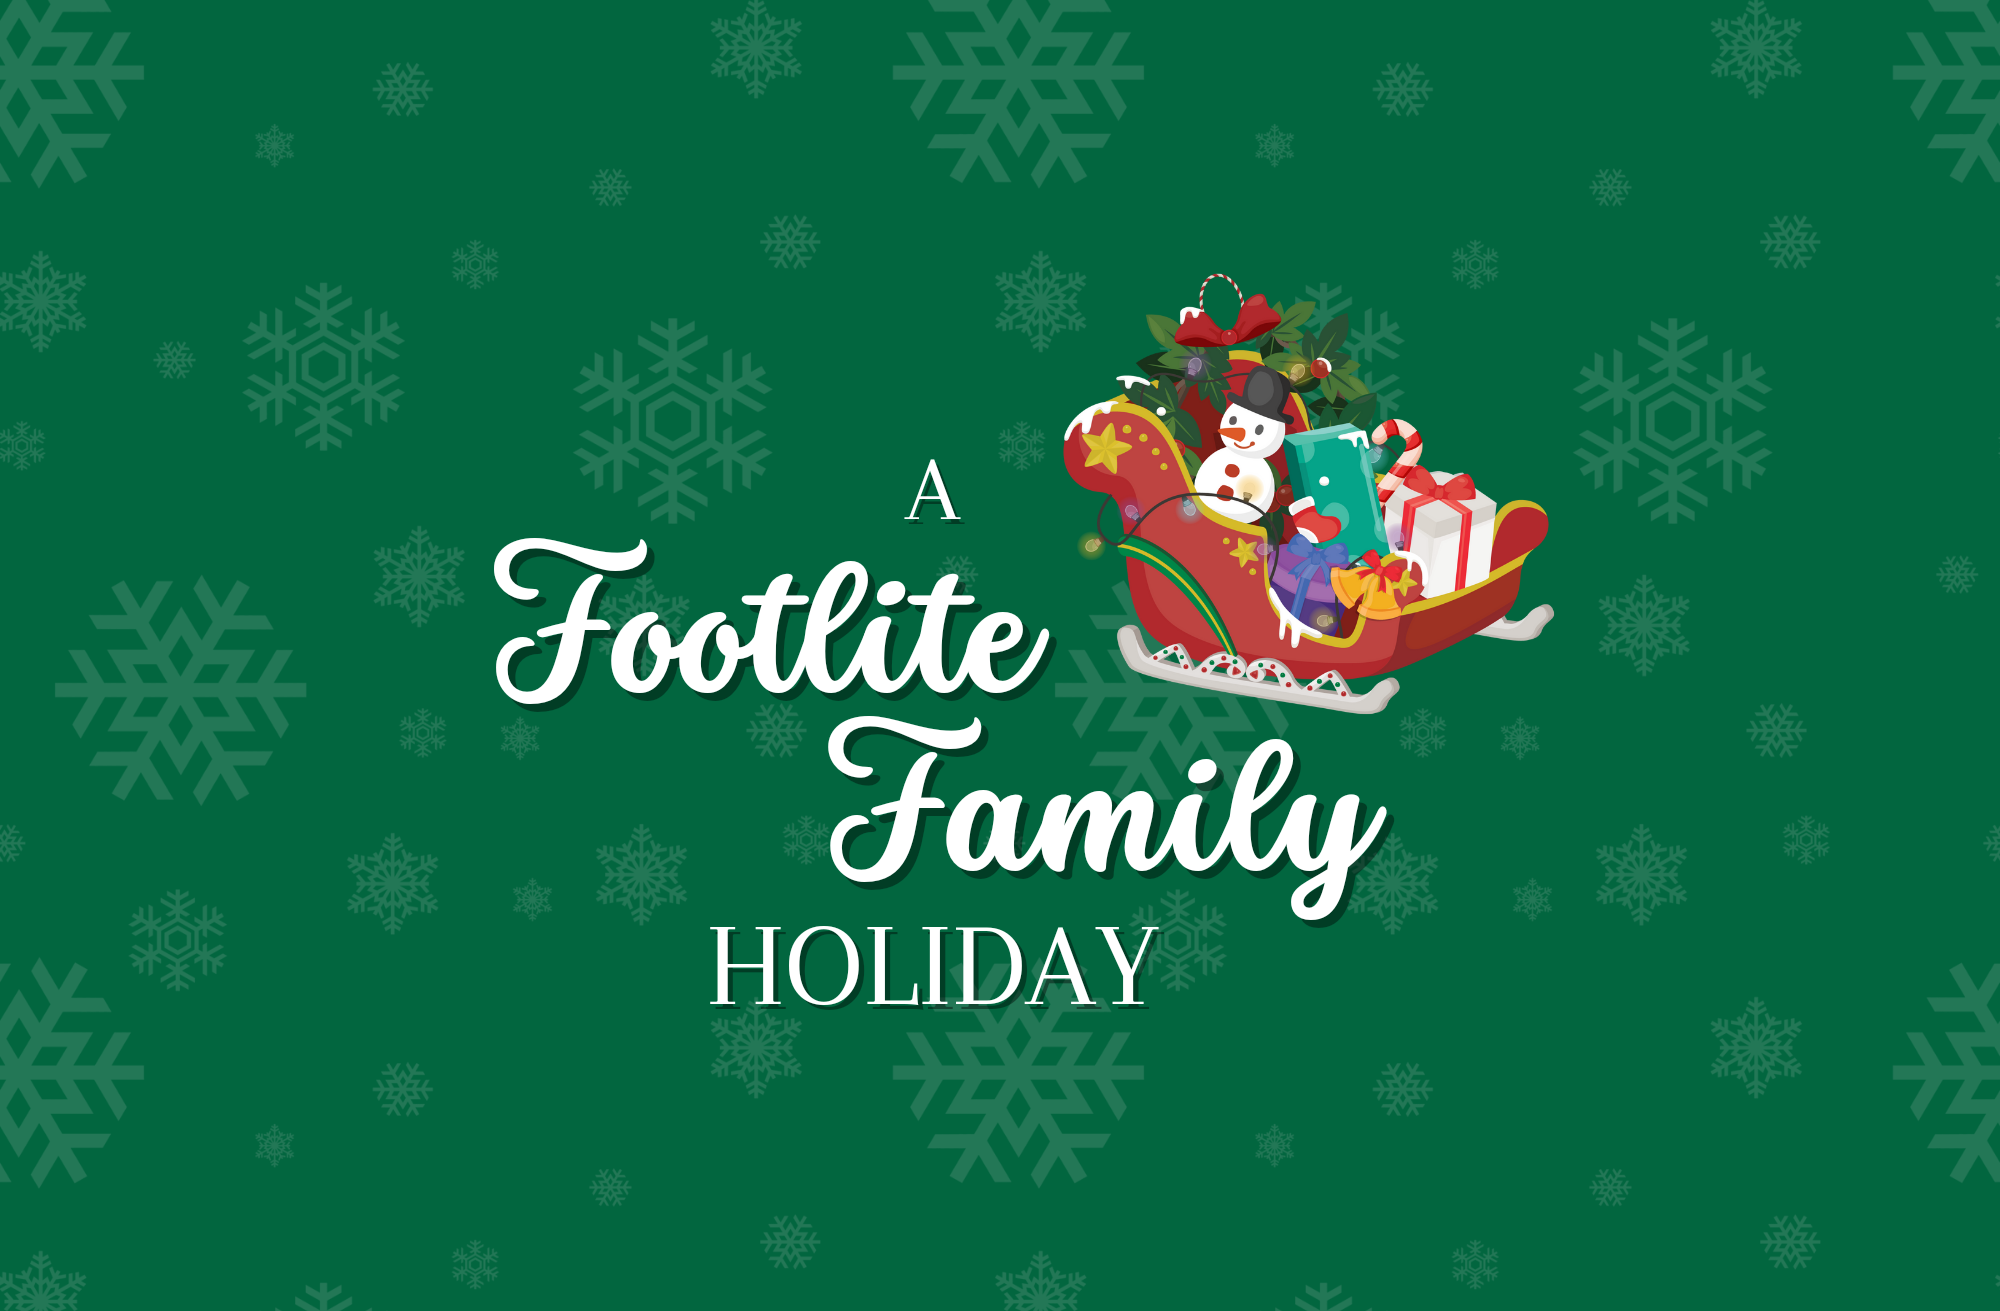 A Footlite Family Holiday